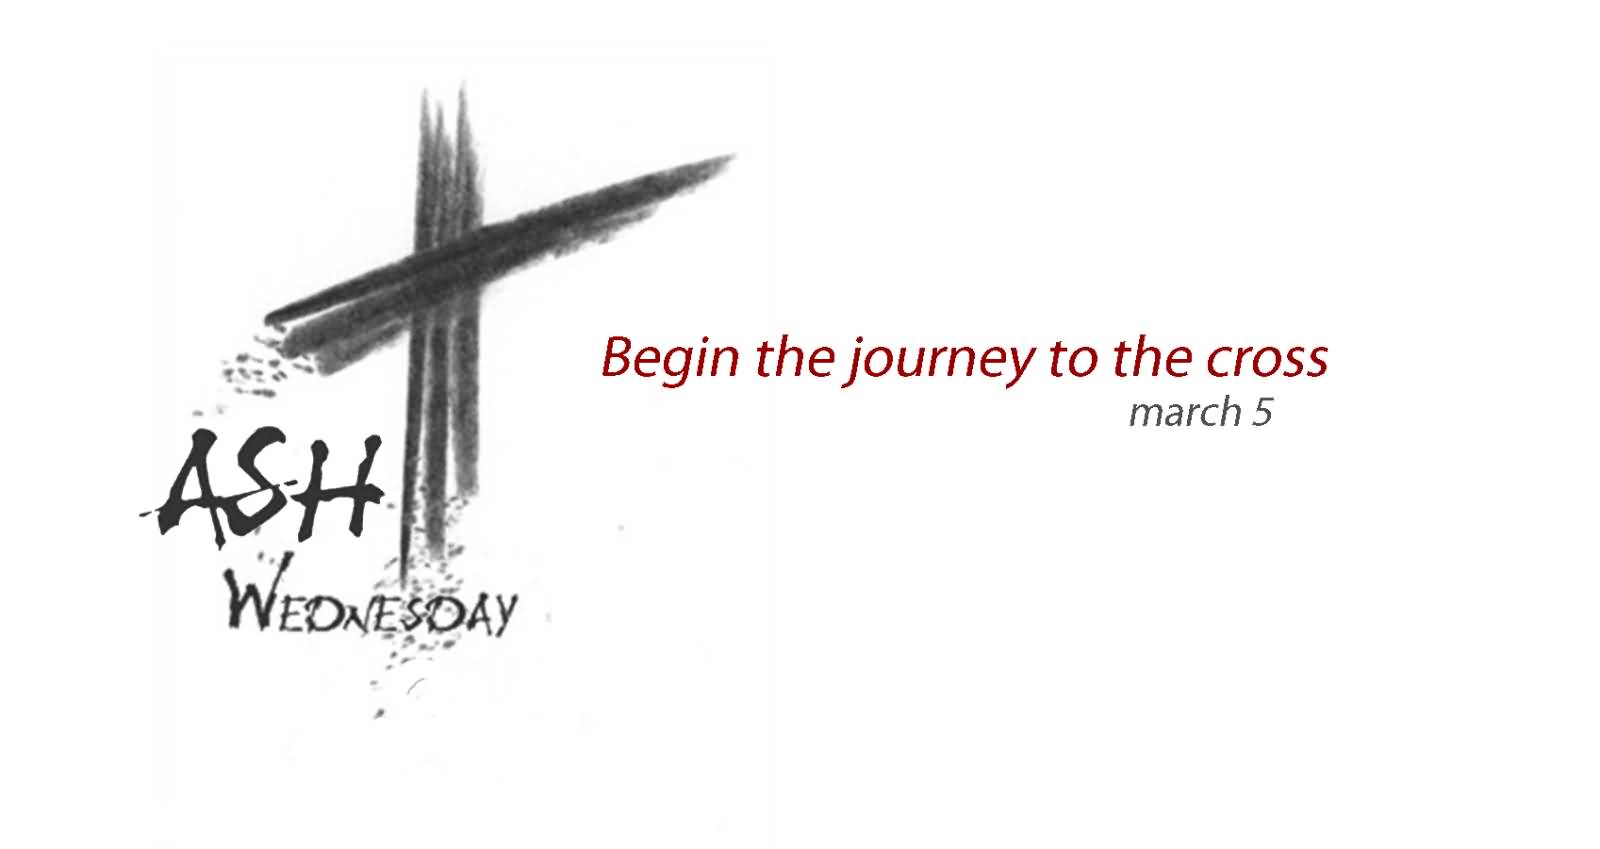 Begin The Journey To The Across Ash Wednesday